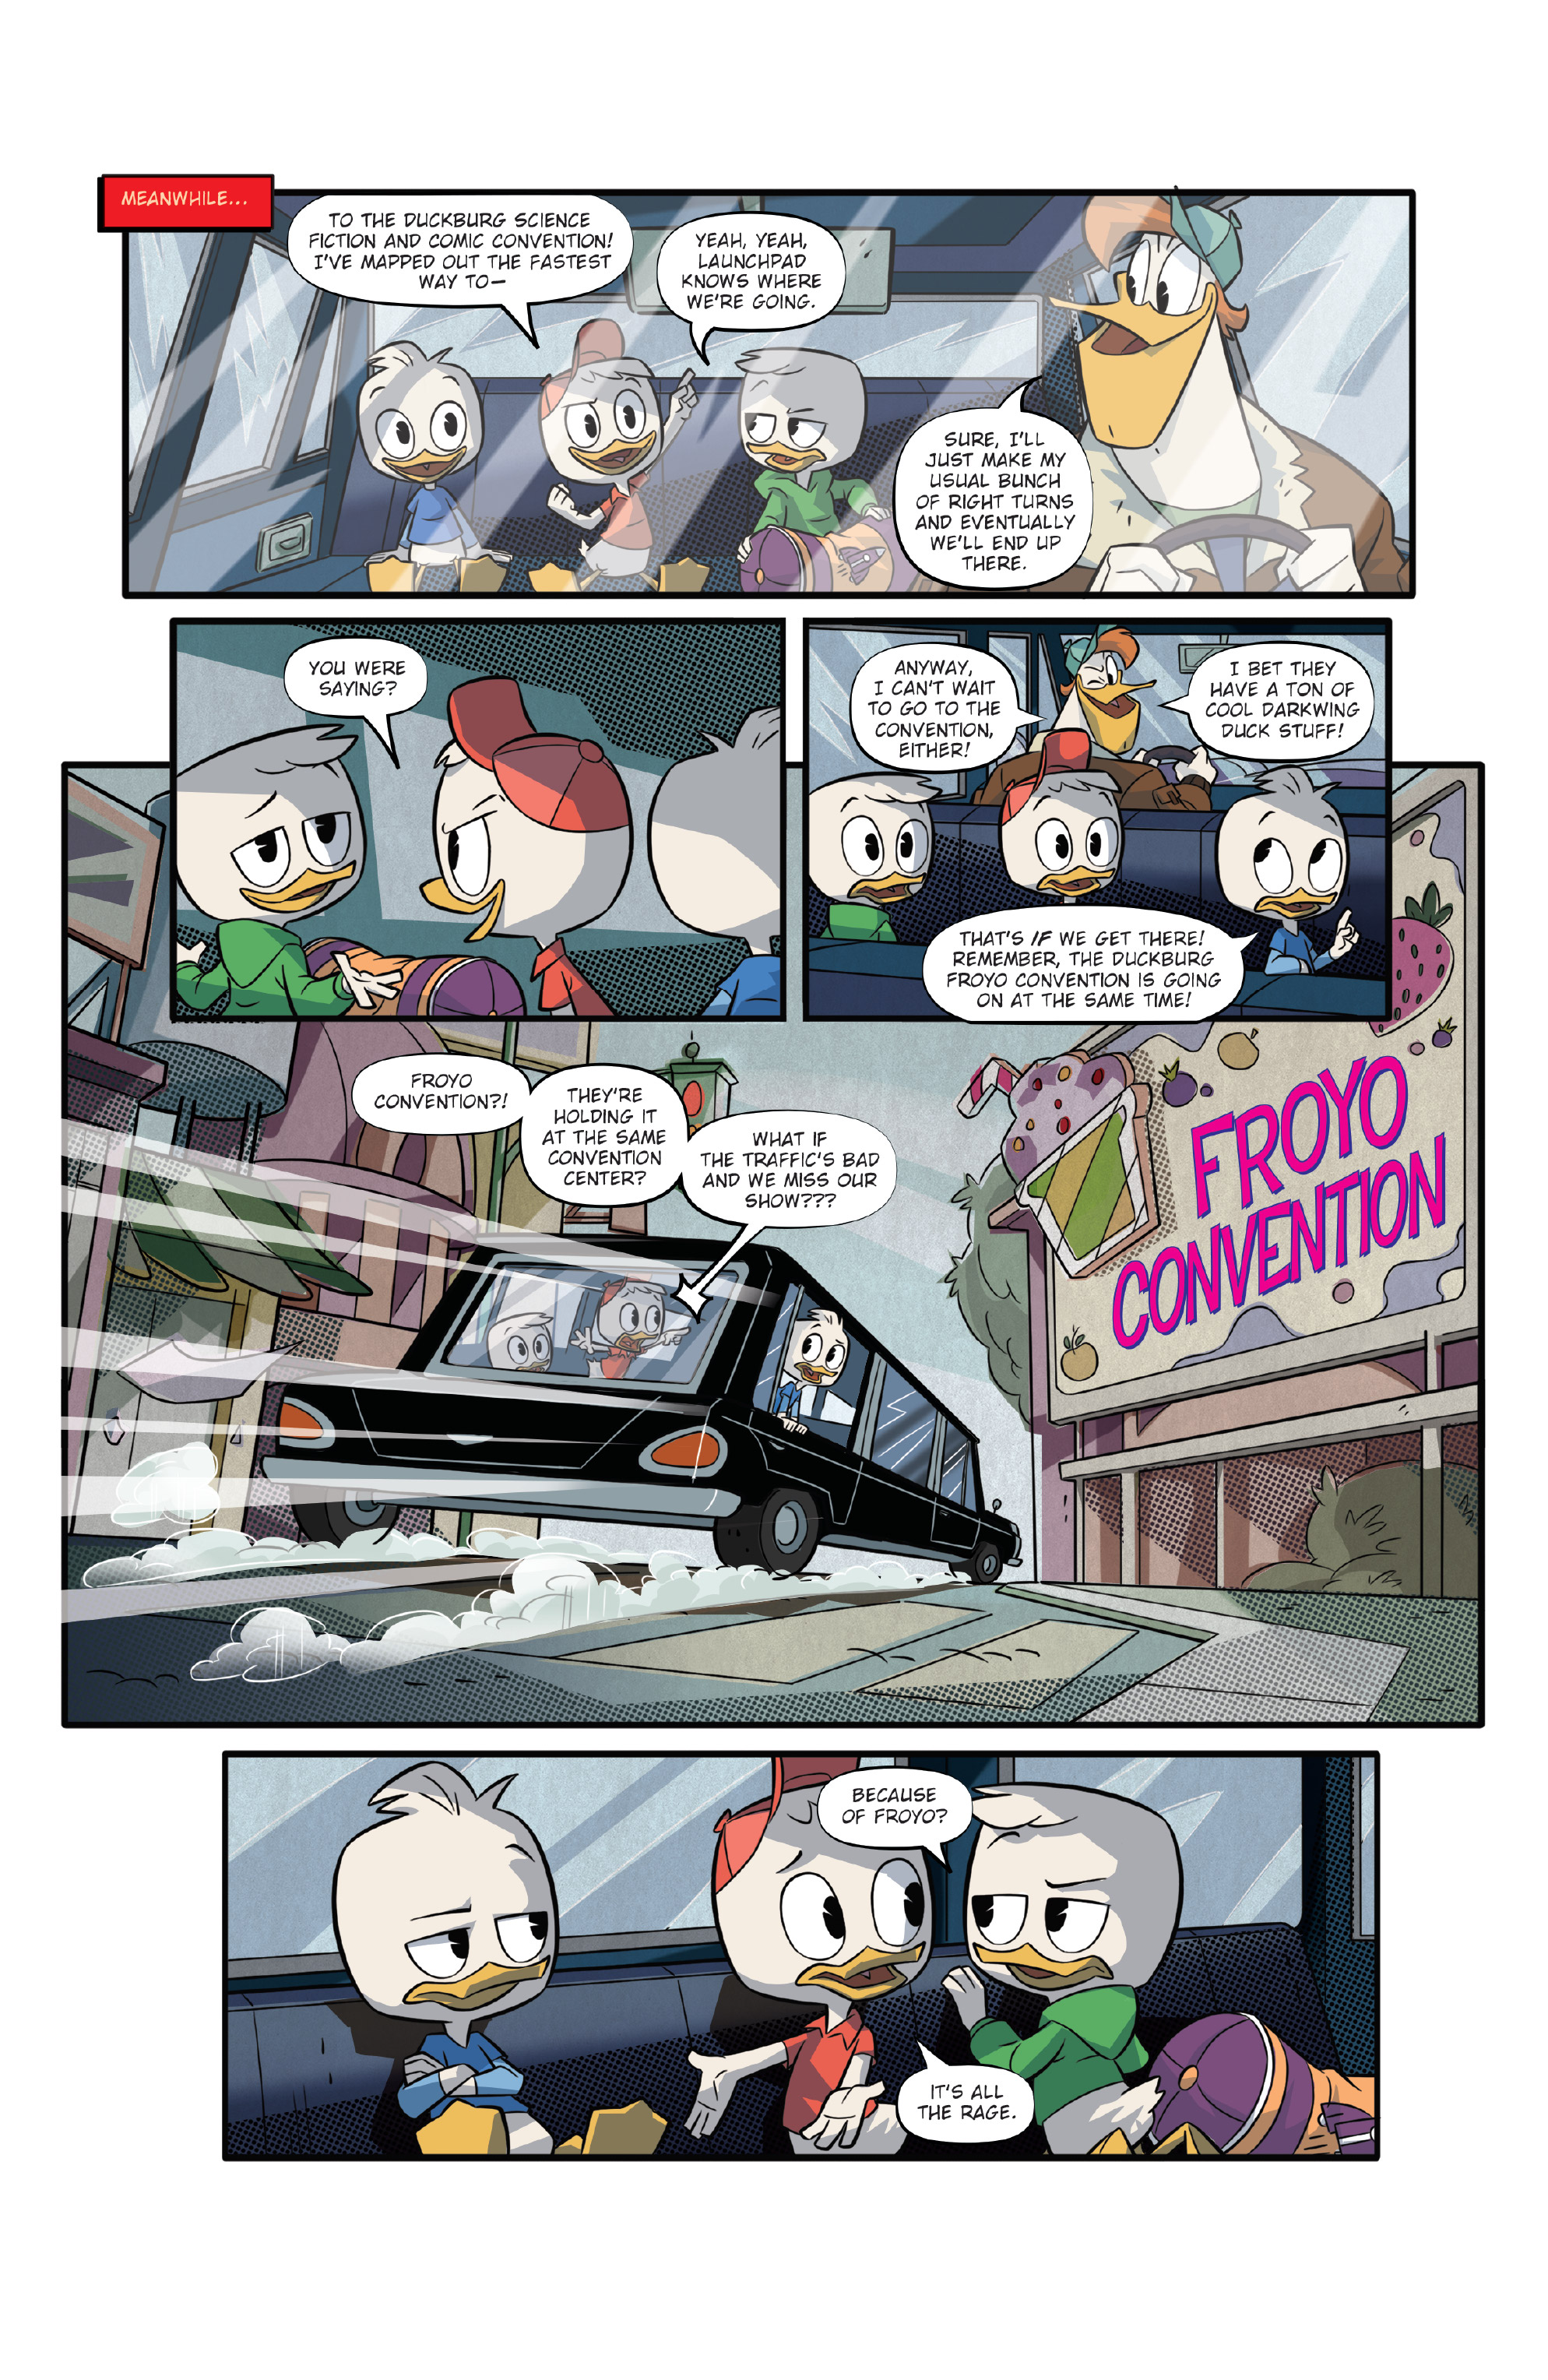 DuckTales: Silence & Science (2019-): Chapter 3 - Page 4